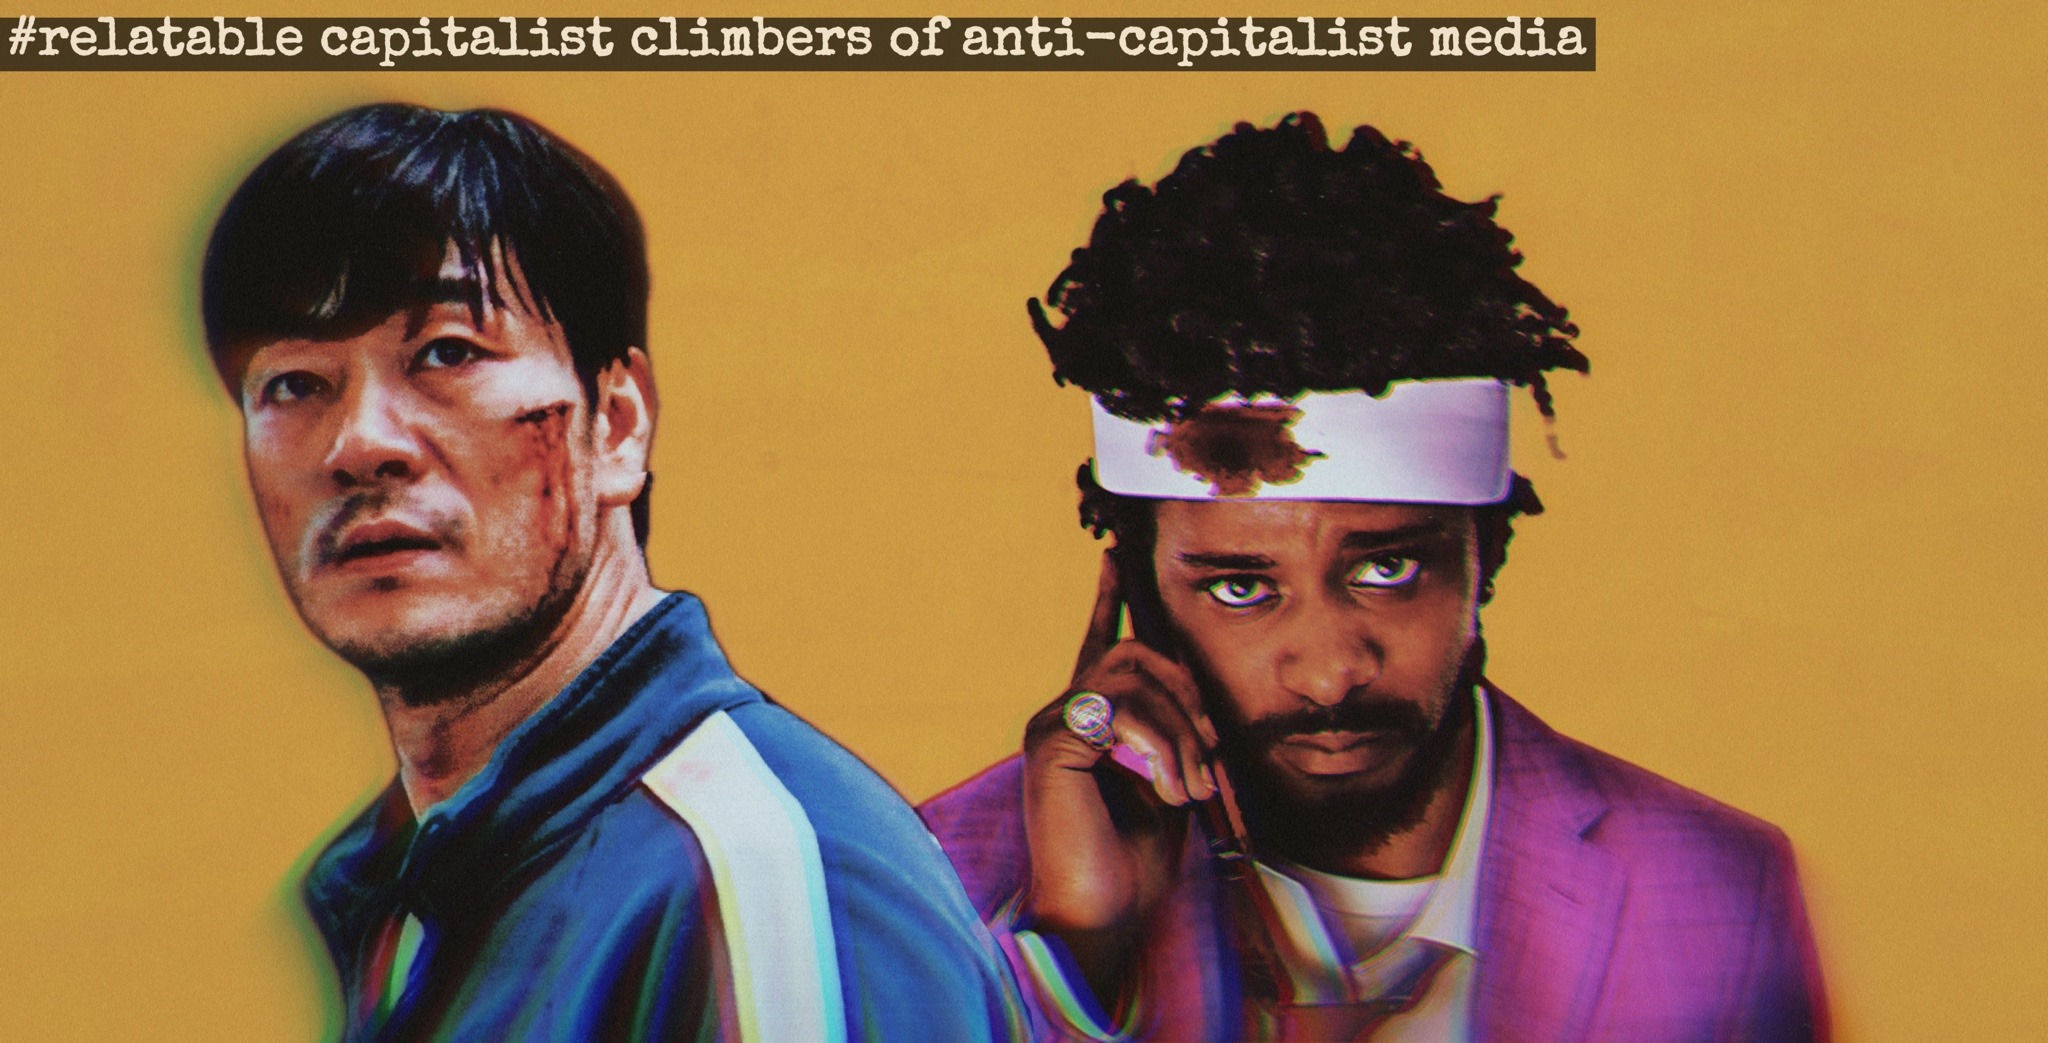 sangwoo and cassius: #relatable capitalist climbers of anti-capitalist media